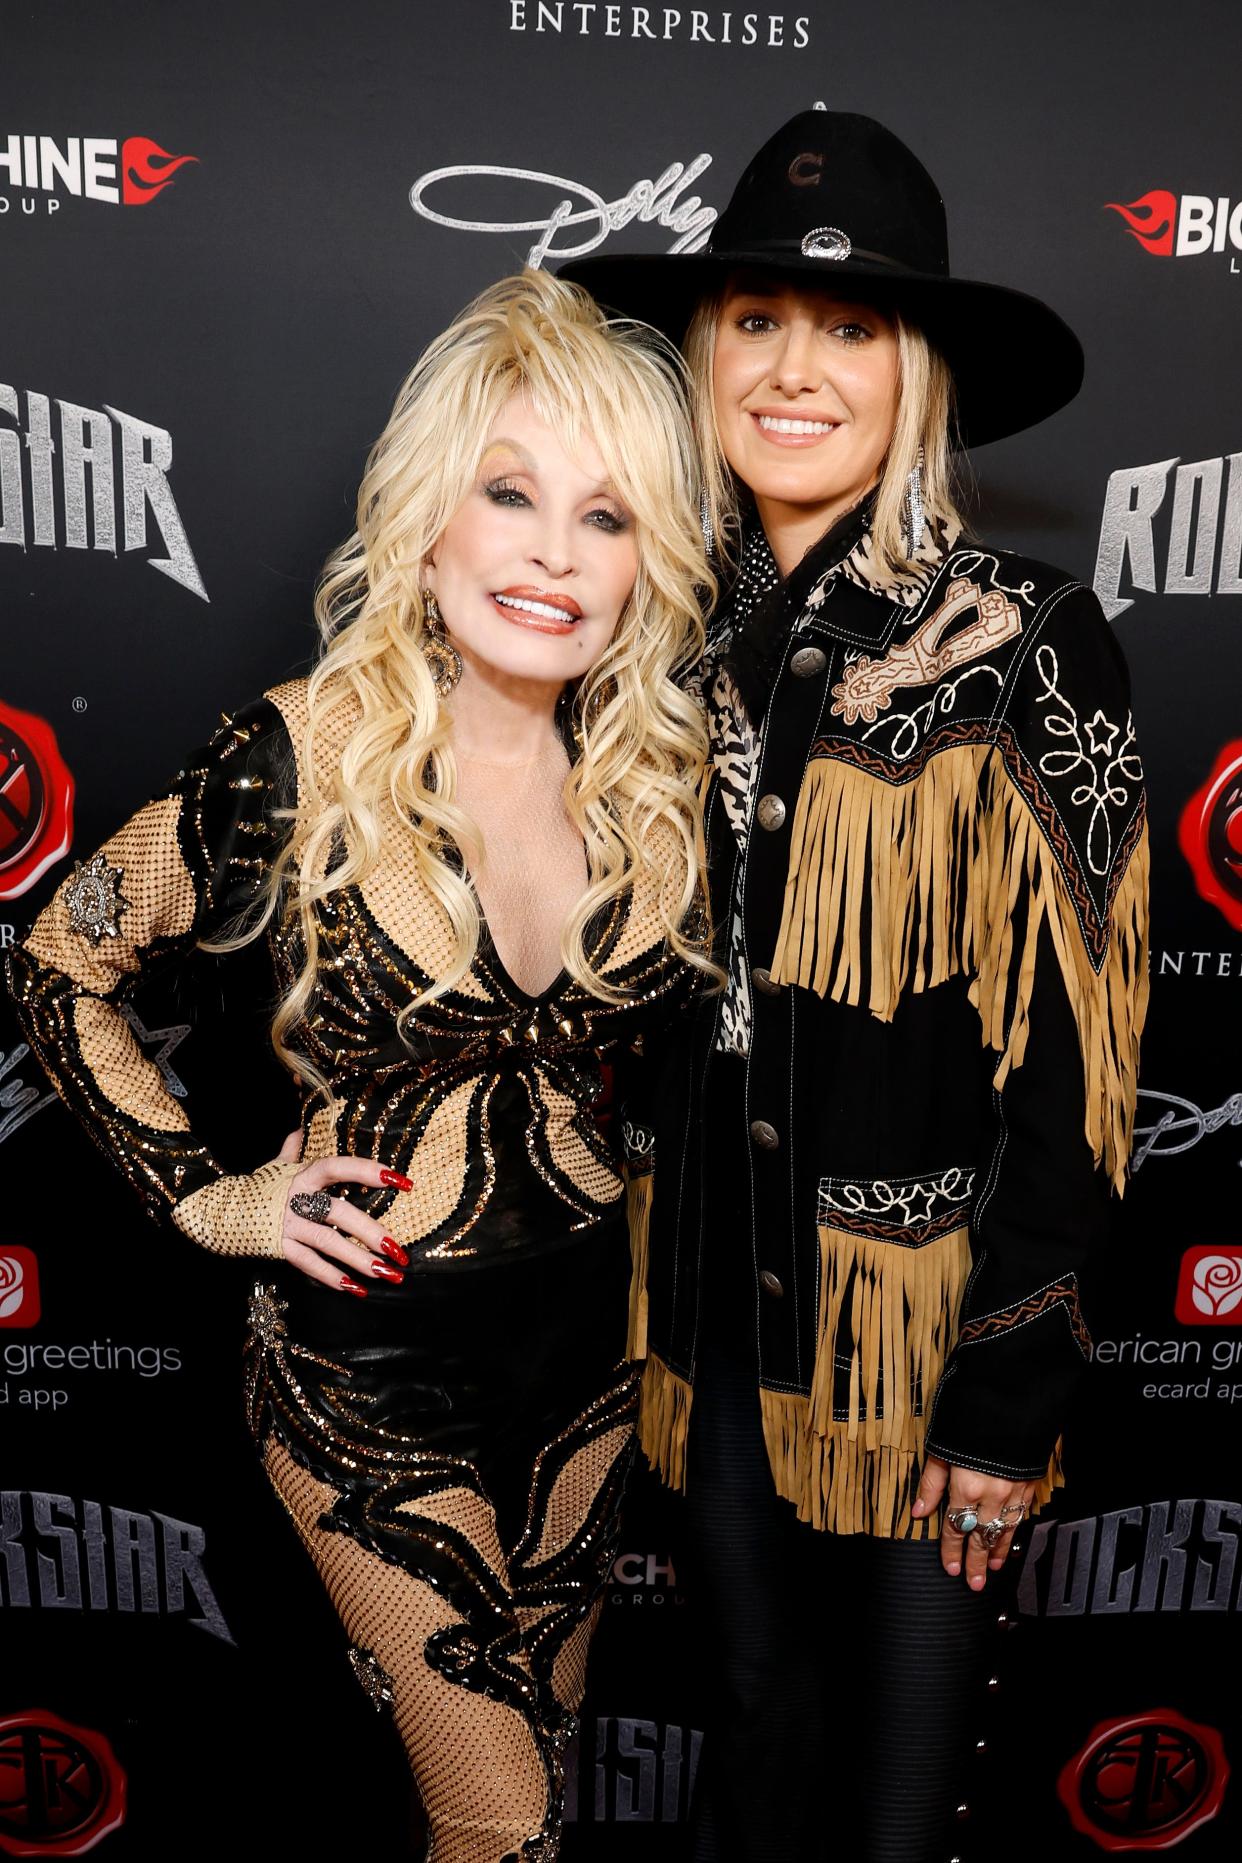 Dolly Parton and Lainey Wilson attend Dolly Parton's Rockstar VIP Album Release Party with American Greetings on November 16, 2023 in Nashville, Tennessee.